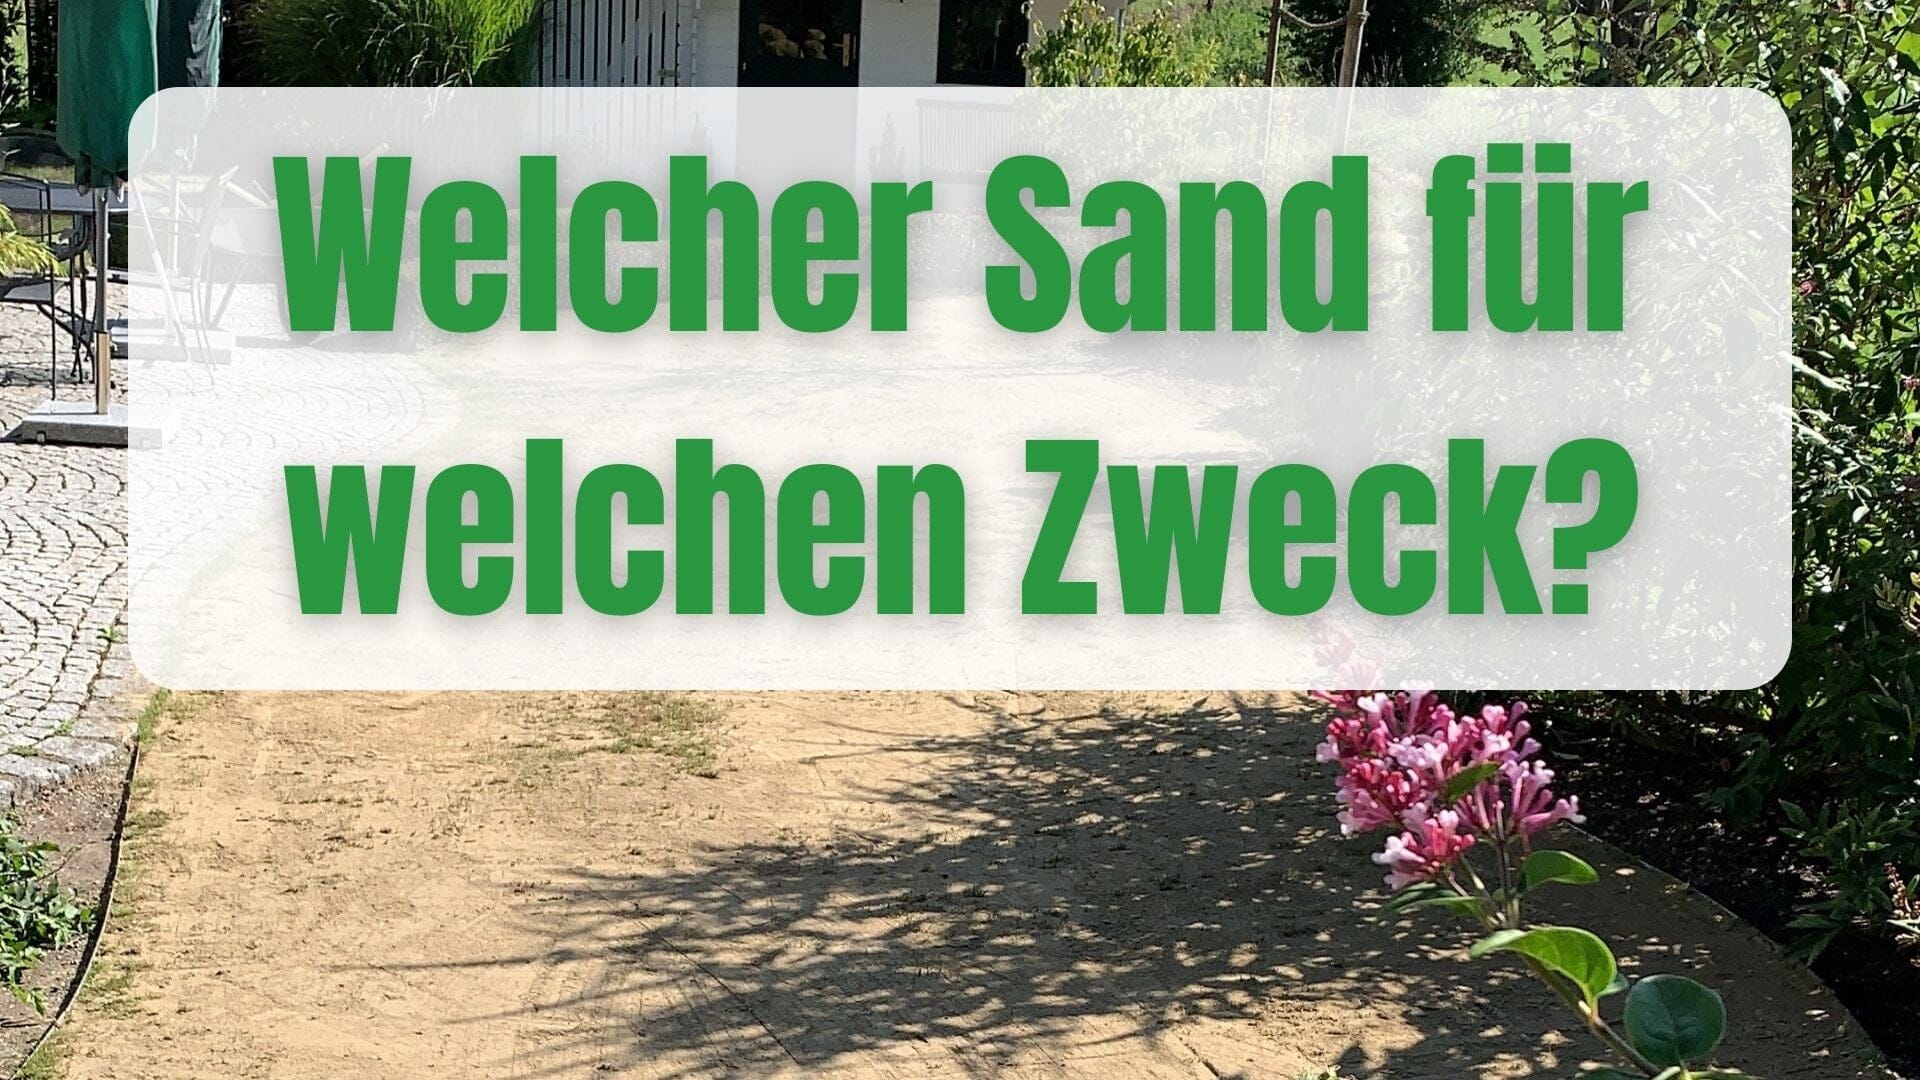 What sand for sanding the lawn?